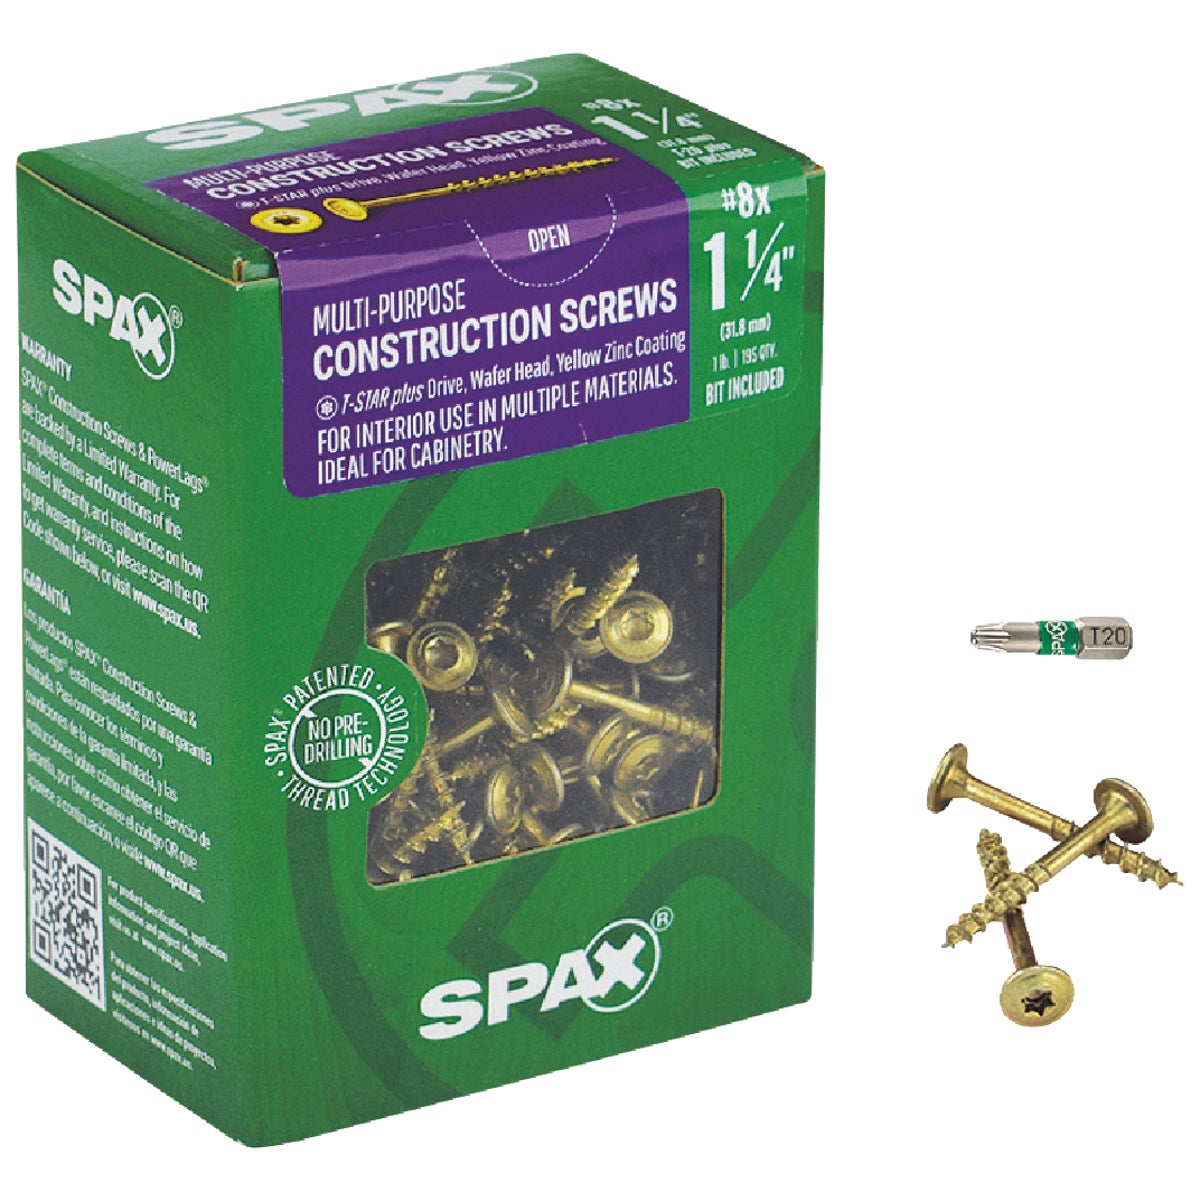 Item 201160, Washer head multi-material construction screws with T-Star Plus drive and 